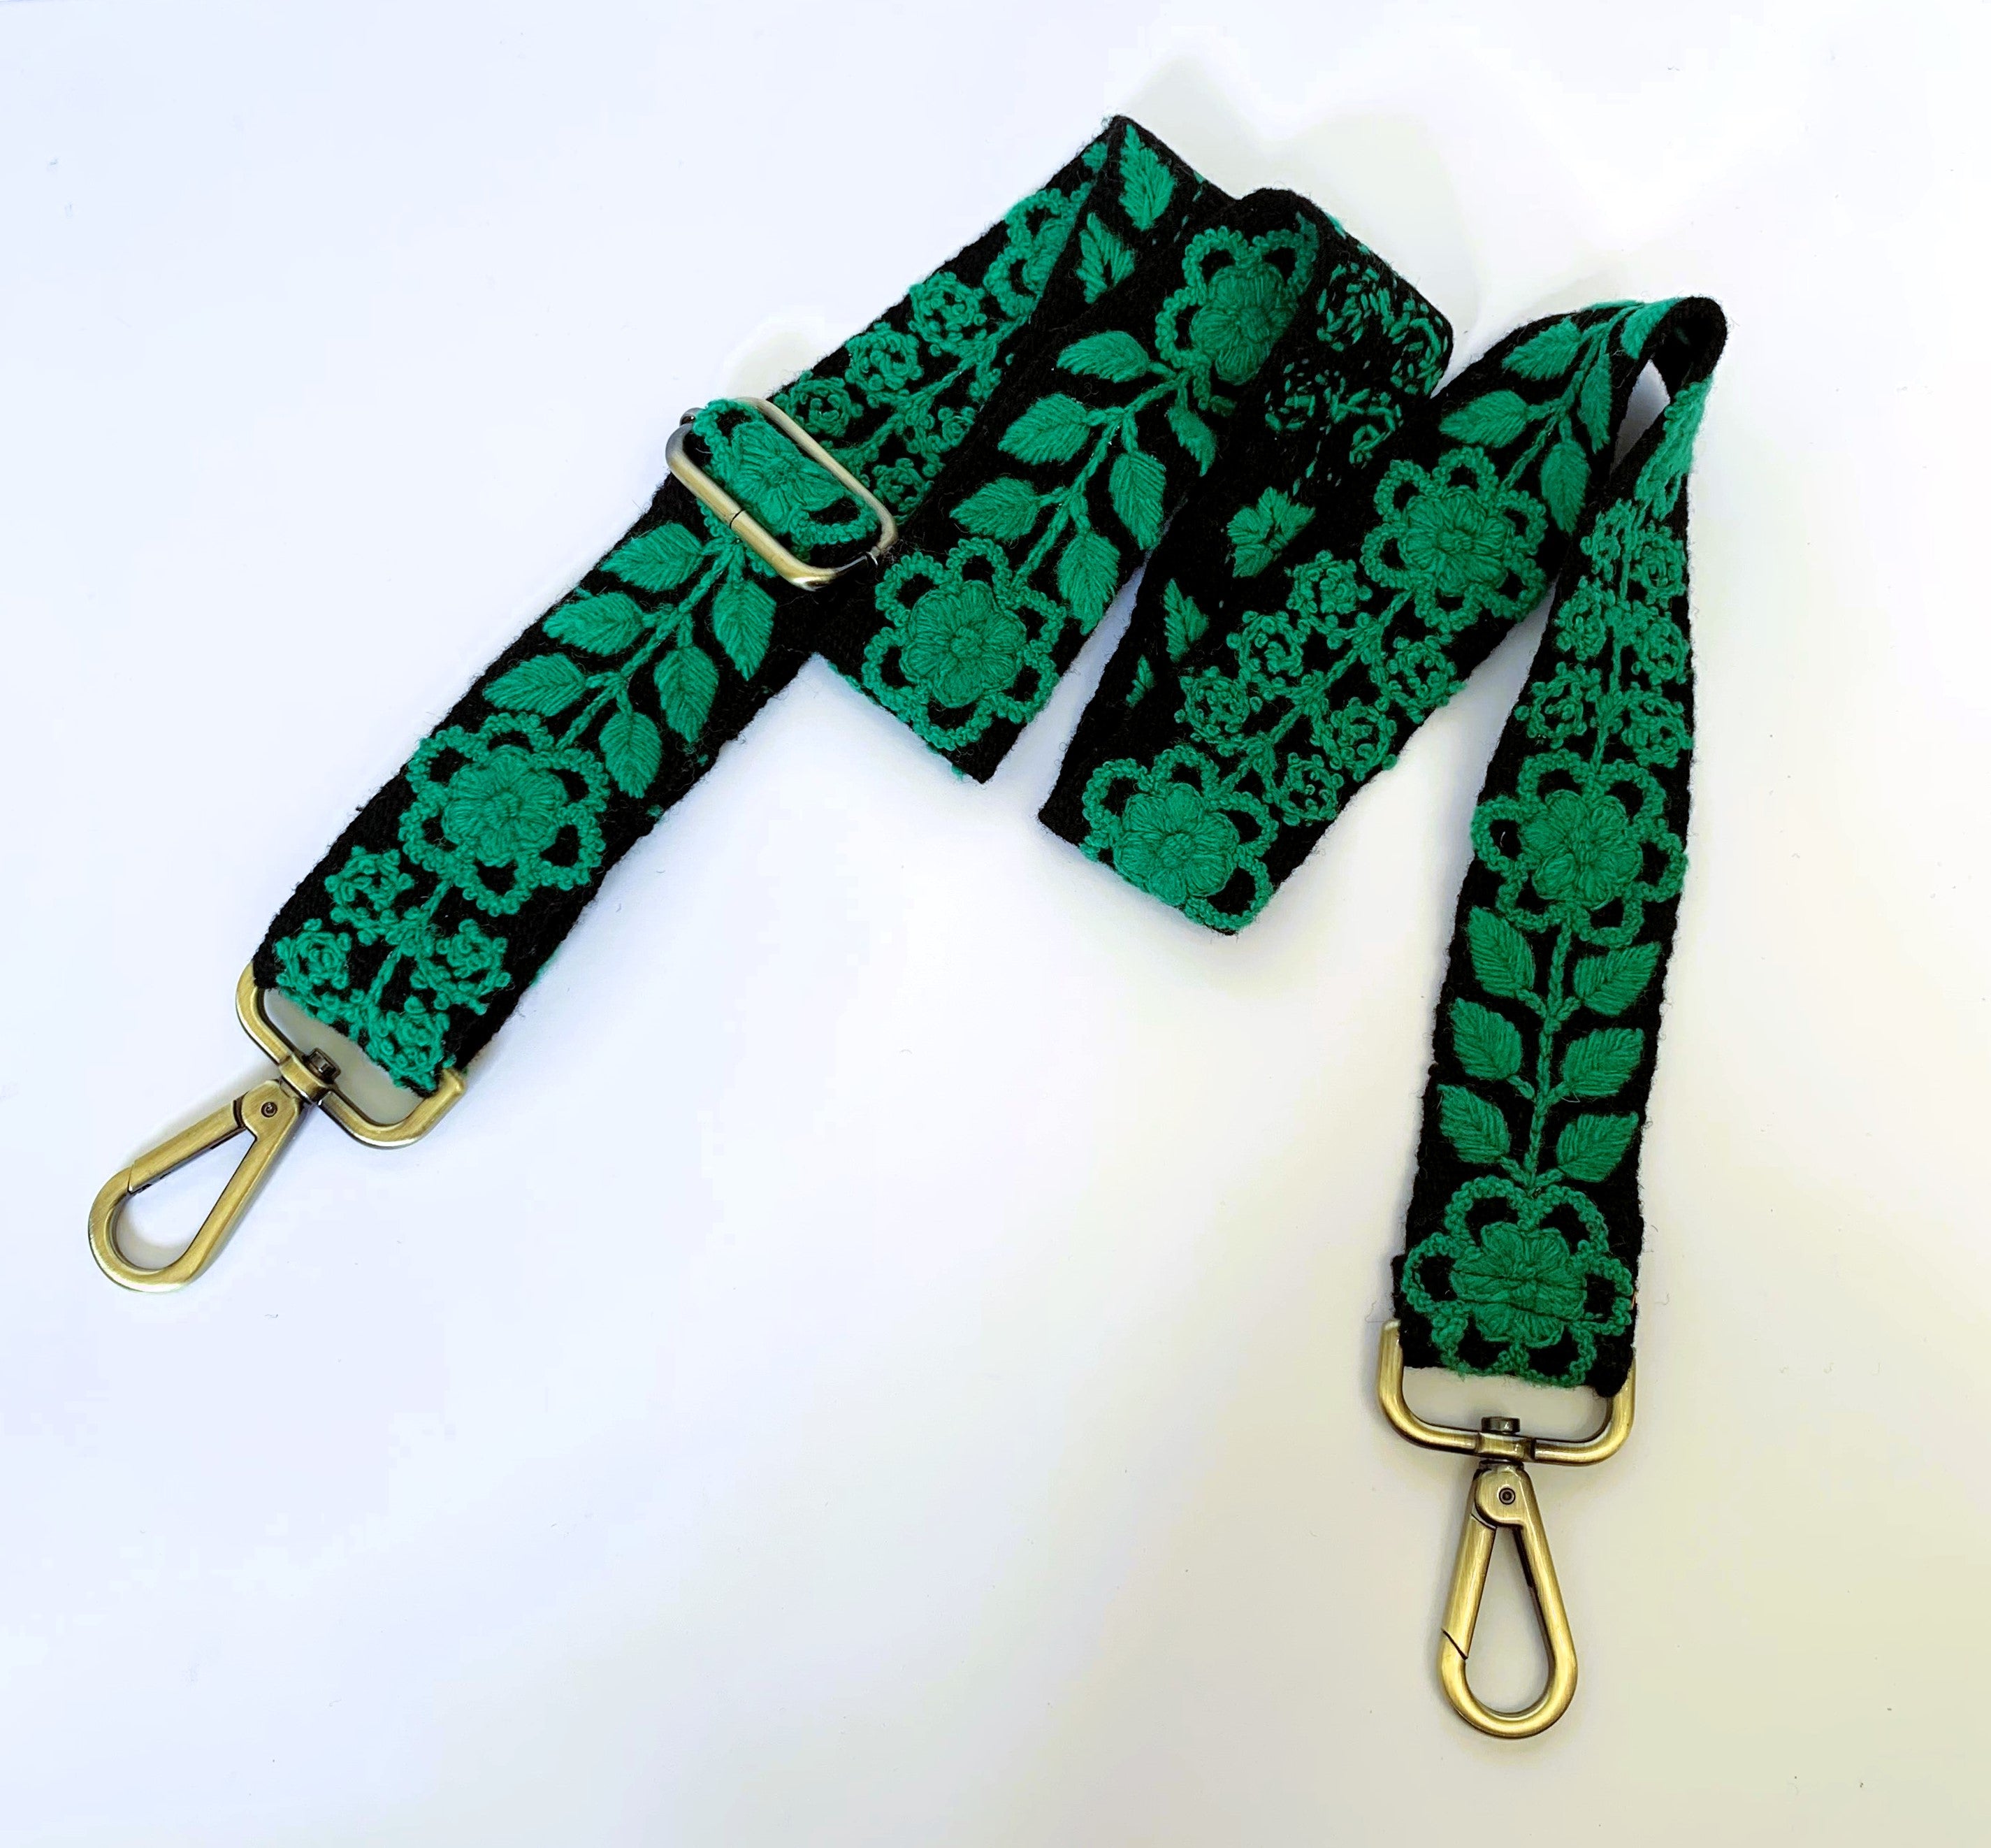 Black and green adjustable purse strap with gold clasps